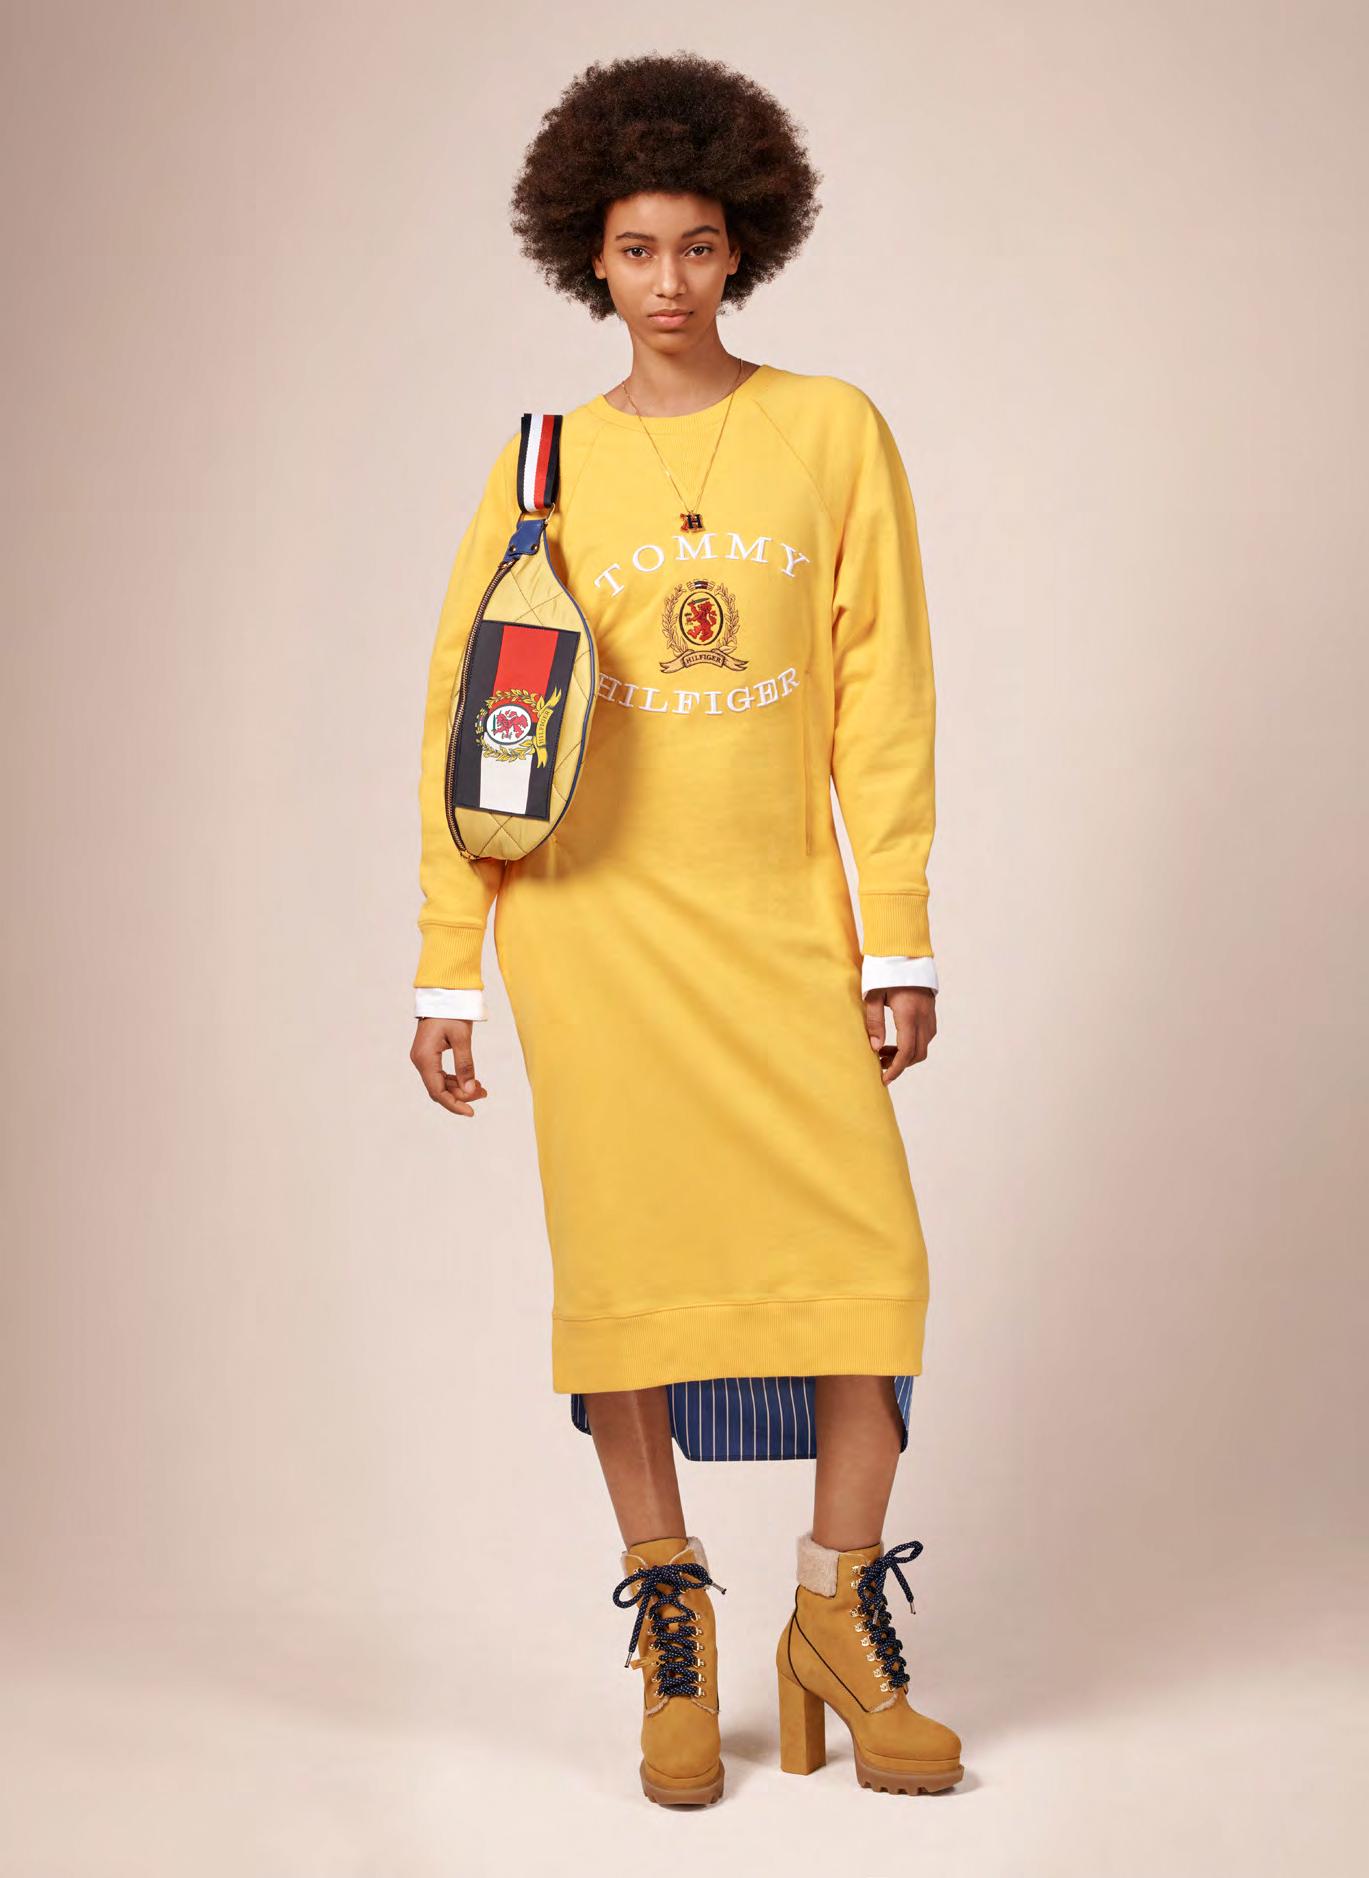 Hilfiger Collection Pre-Fall 2018